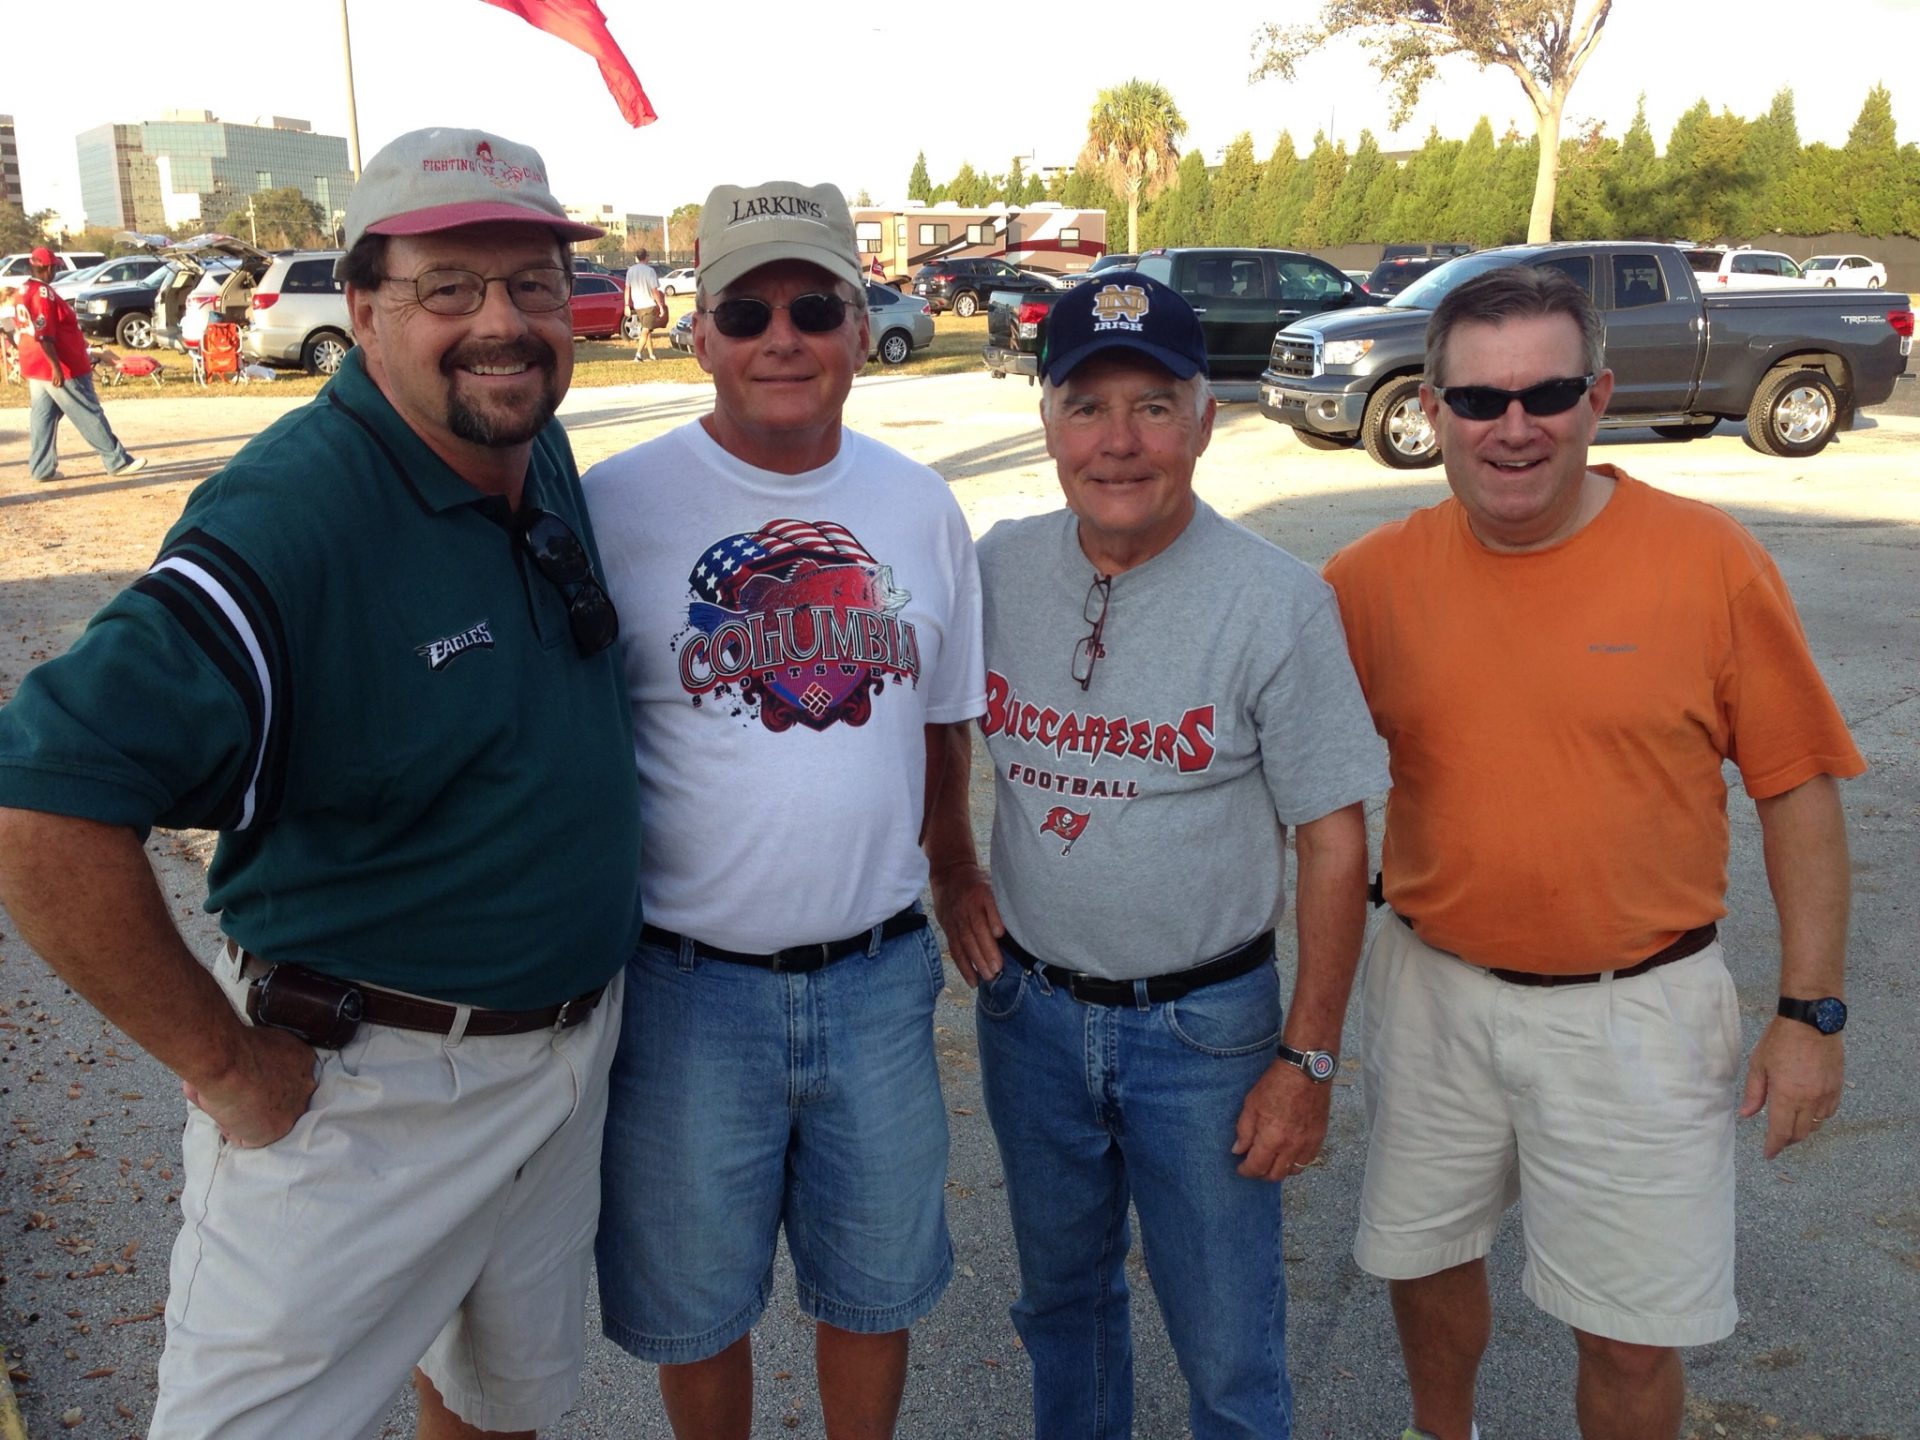 The four amigos from the Village of Piedmont, attending the Eagles - Bucs game on December 9, 2012. L-R Michael Gavigan, Bob Vogel, Pat Murphy and Eric Ehlers. RIP dear friend Michael.